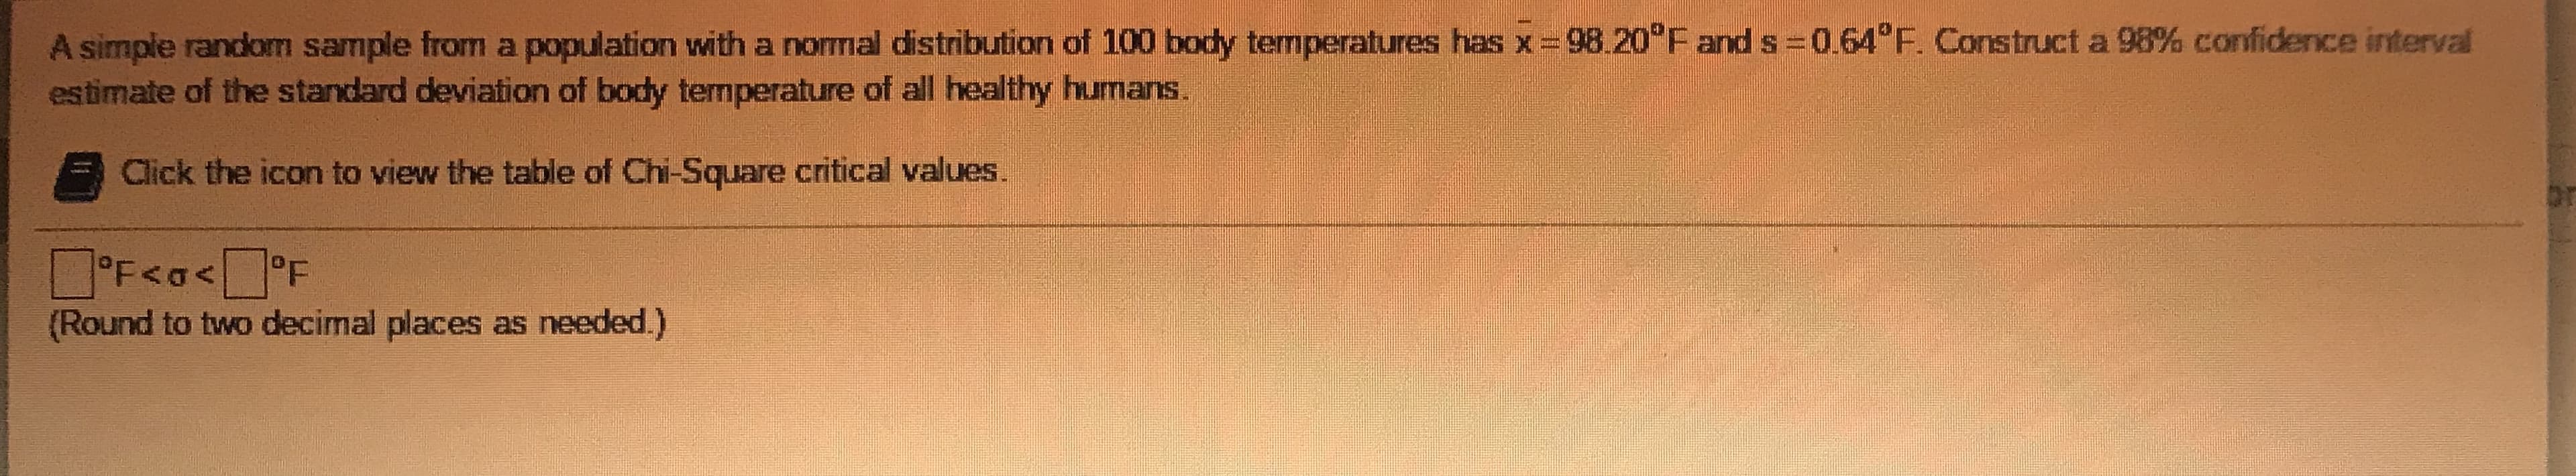 A simple random sample from a population with a nomal distribution of 100 body temperatures has x= 98.20°F and s 0.64°F. Construct a 98% confidence interval
estimate of the standard deviation of body temperature of alI healthy humans.
